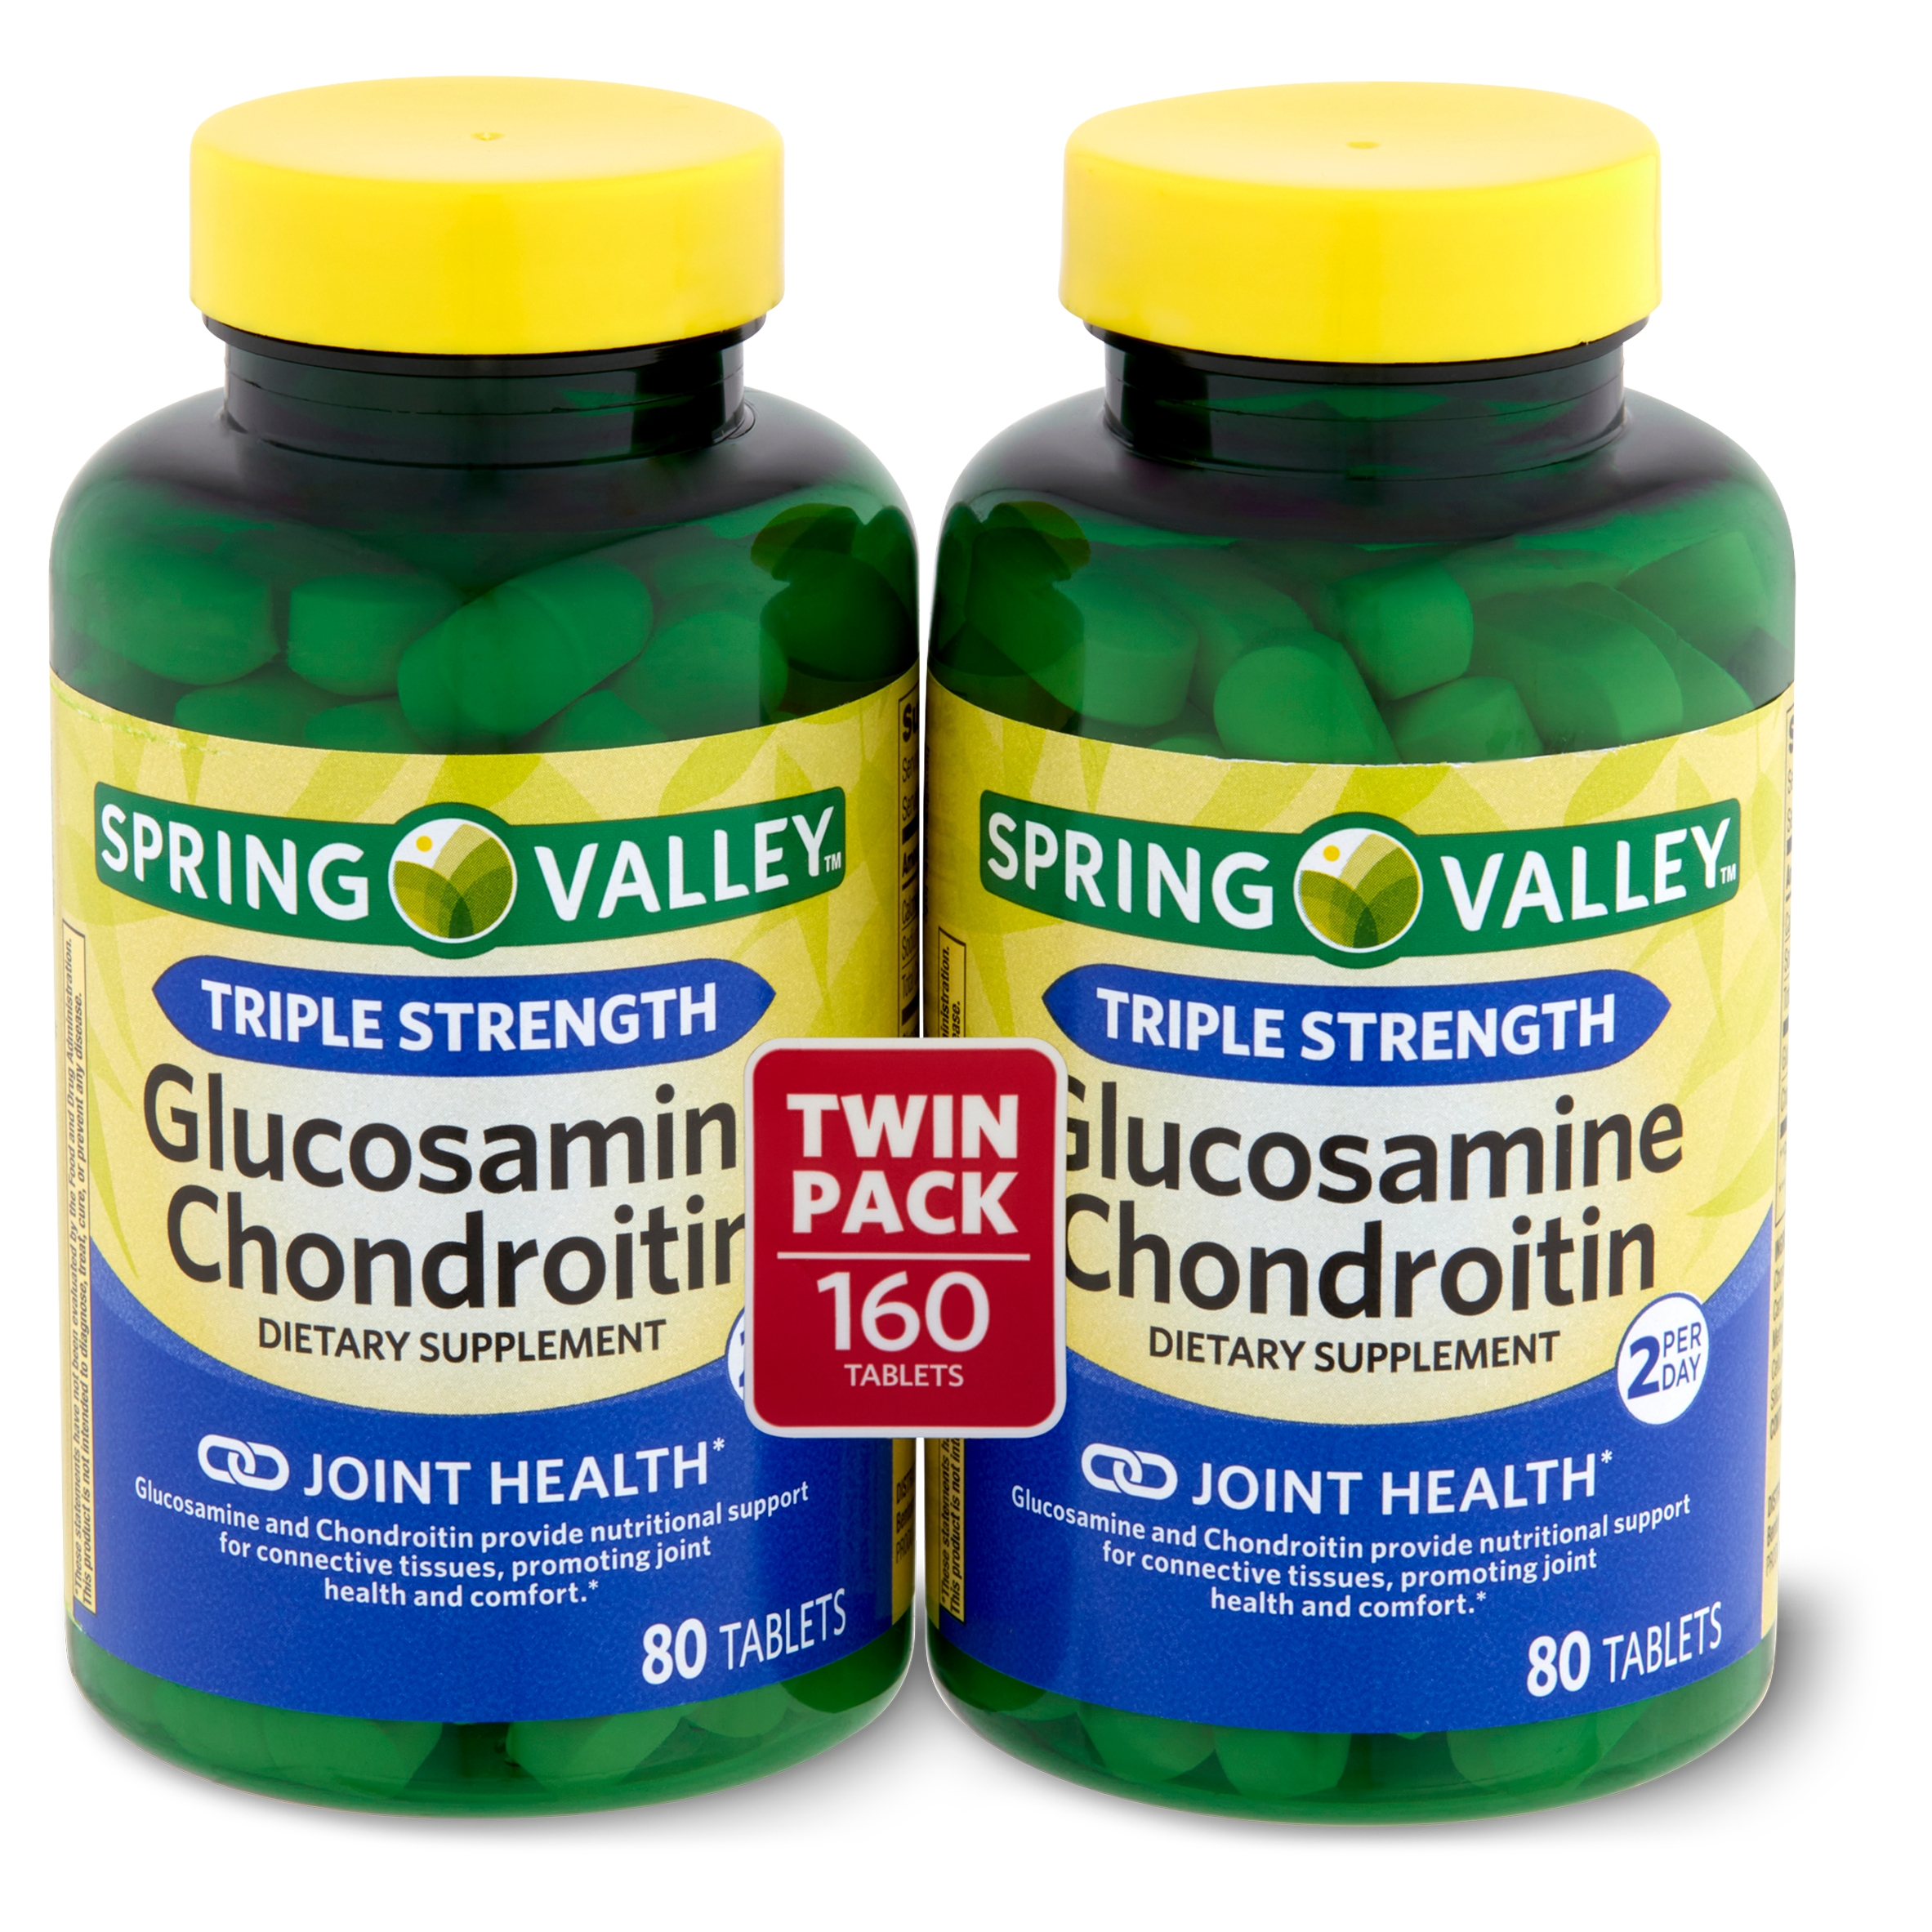 Spring Valley Triple Strength Glucosamine Chondroitin Dietary Supplement Twin Pack, 80 Count, 2 Pack - image 3 of 9